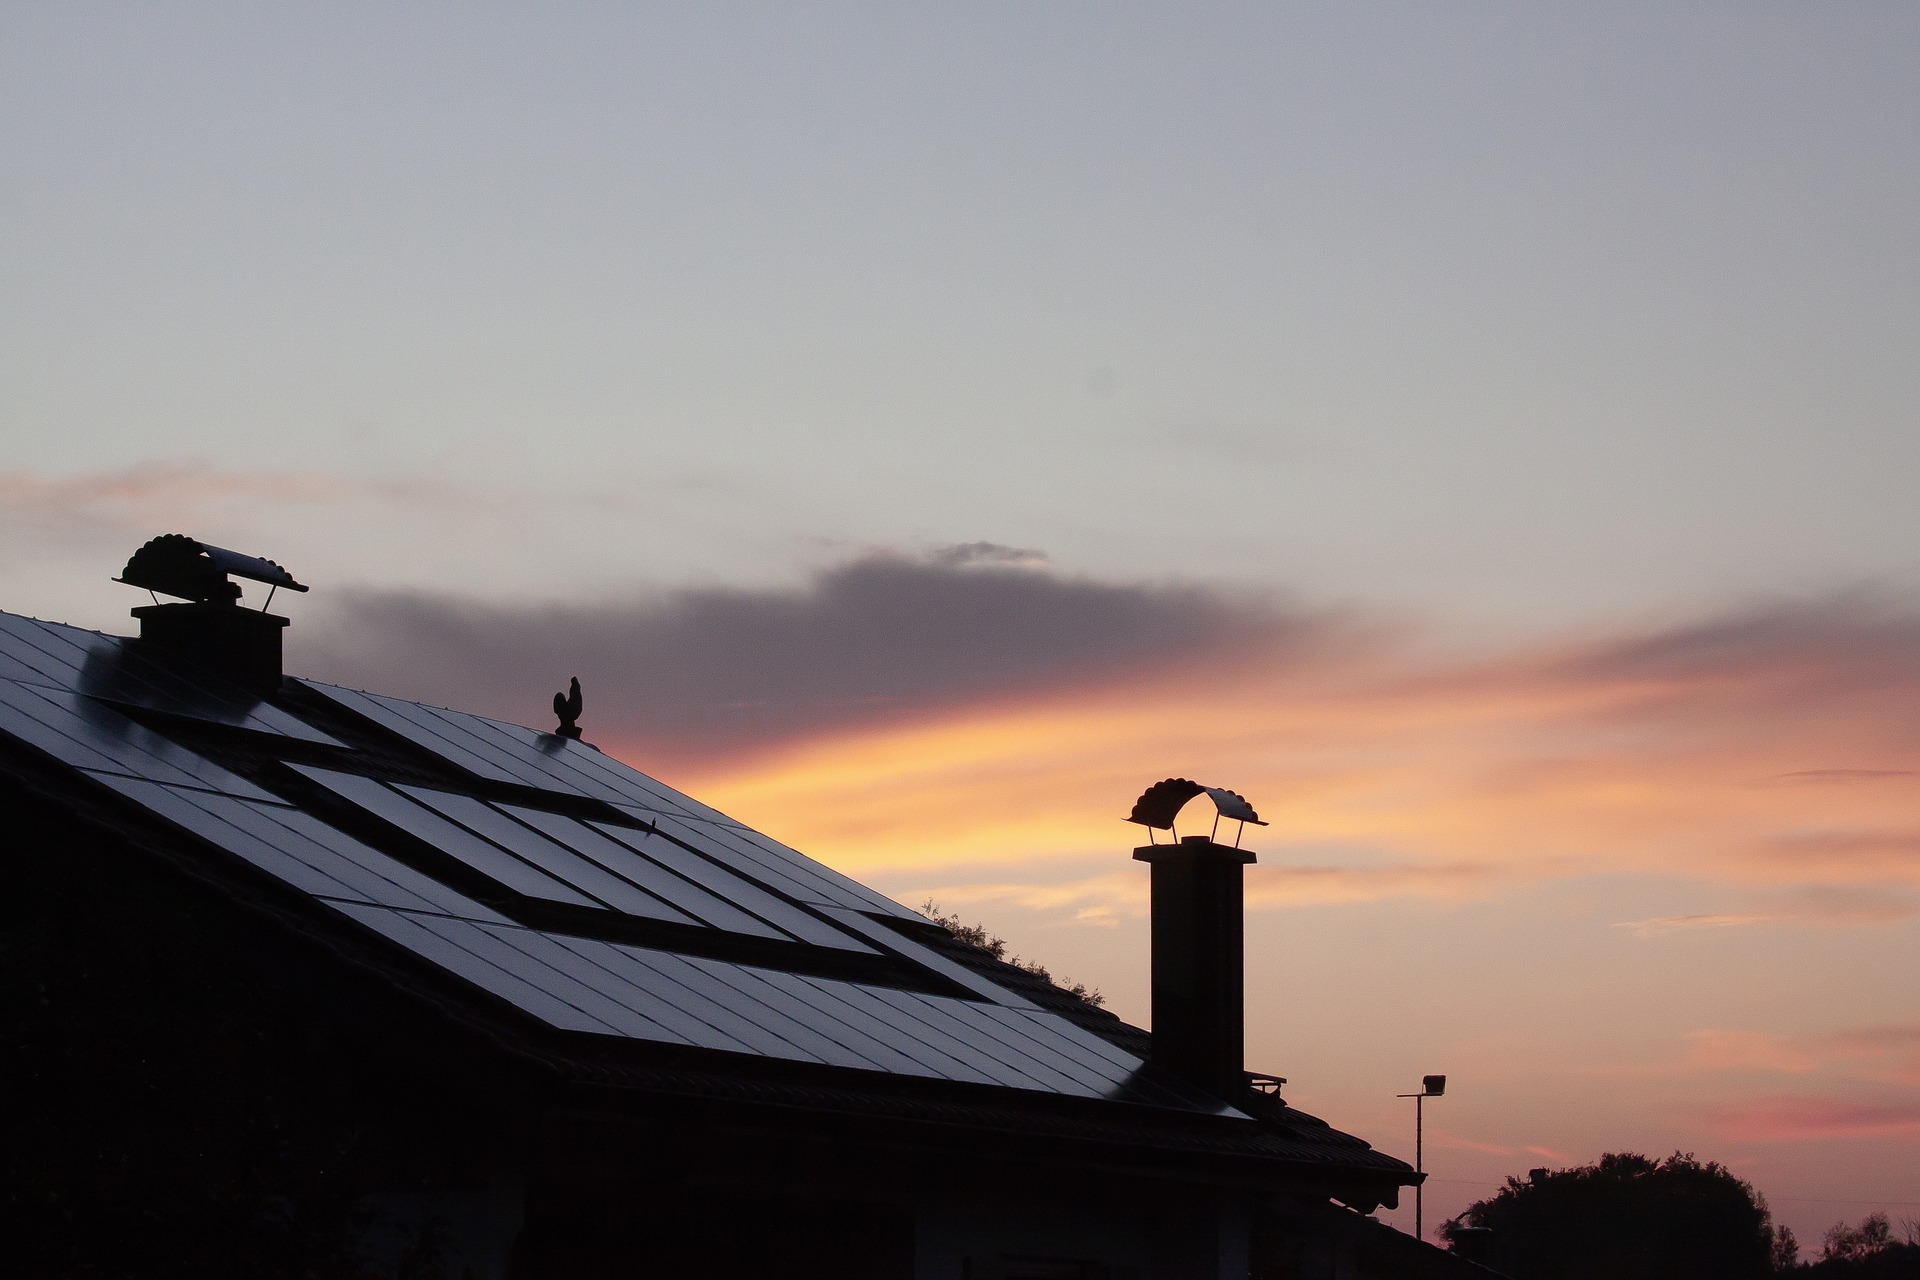 Solar panels on a home's roof at sunrise.